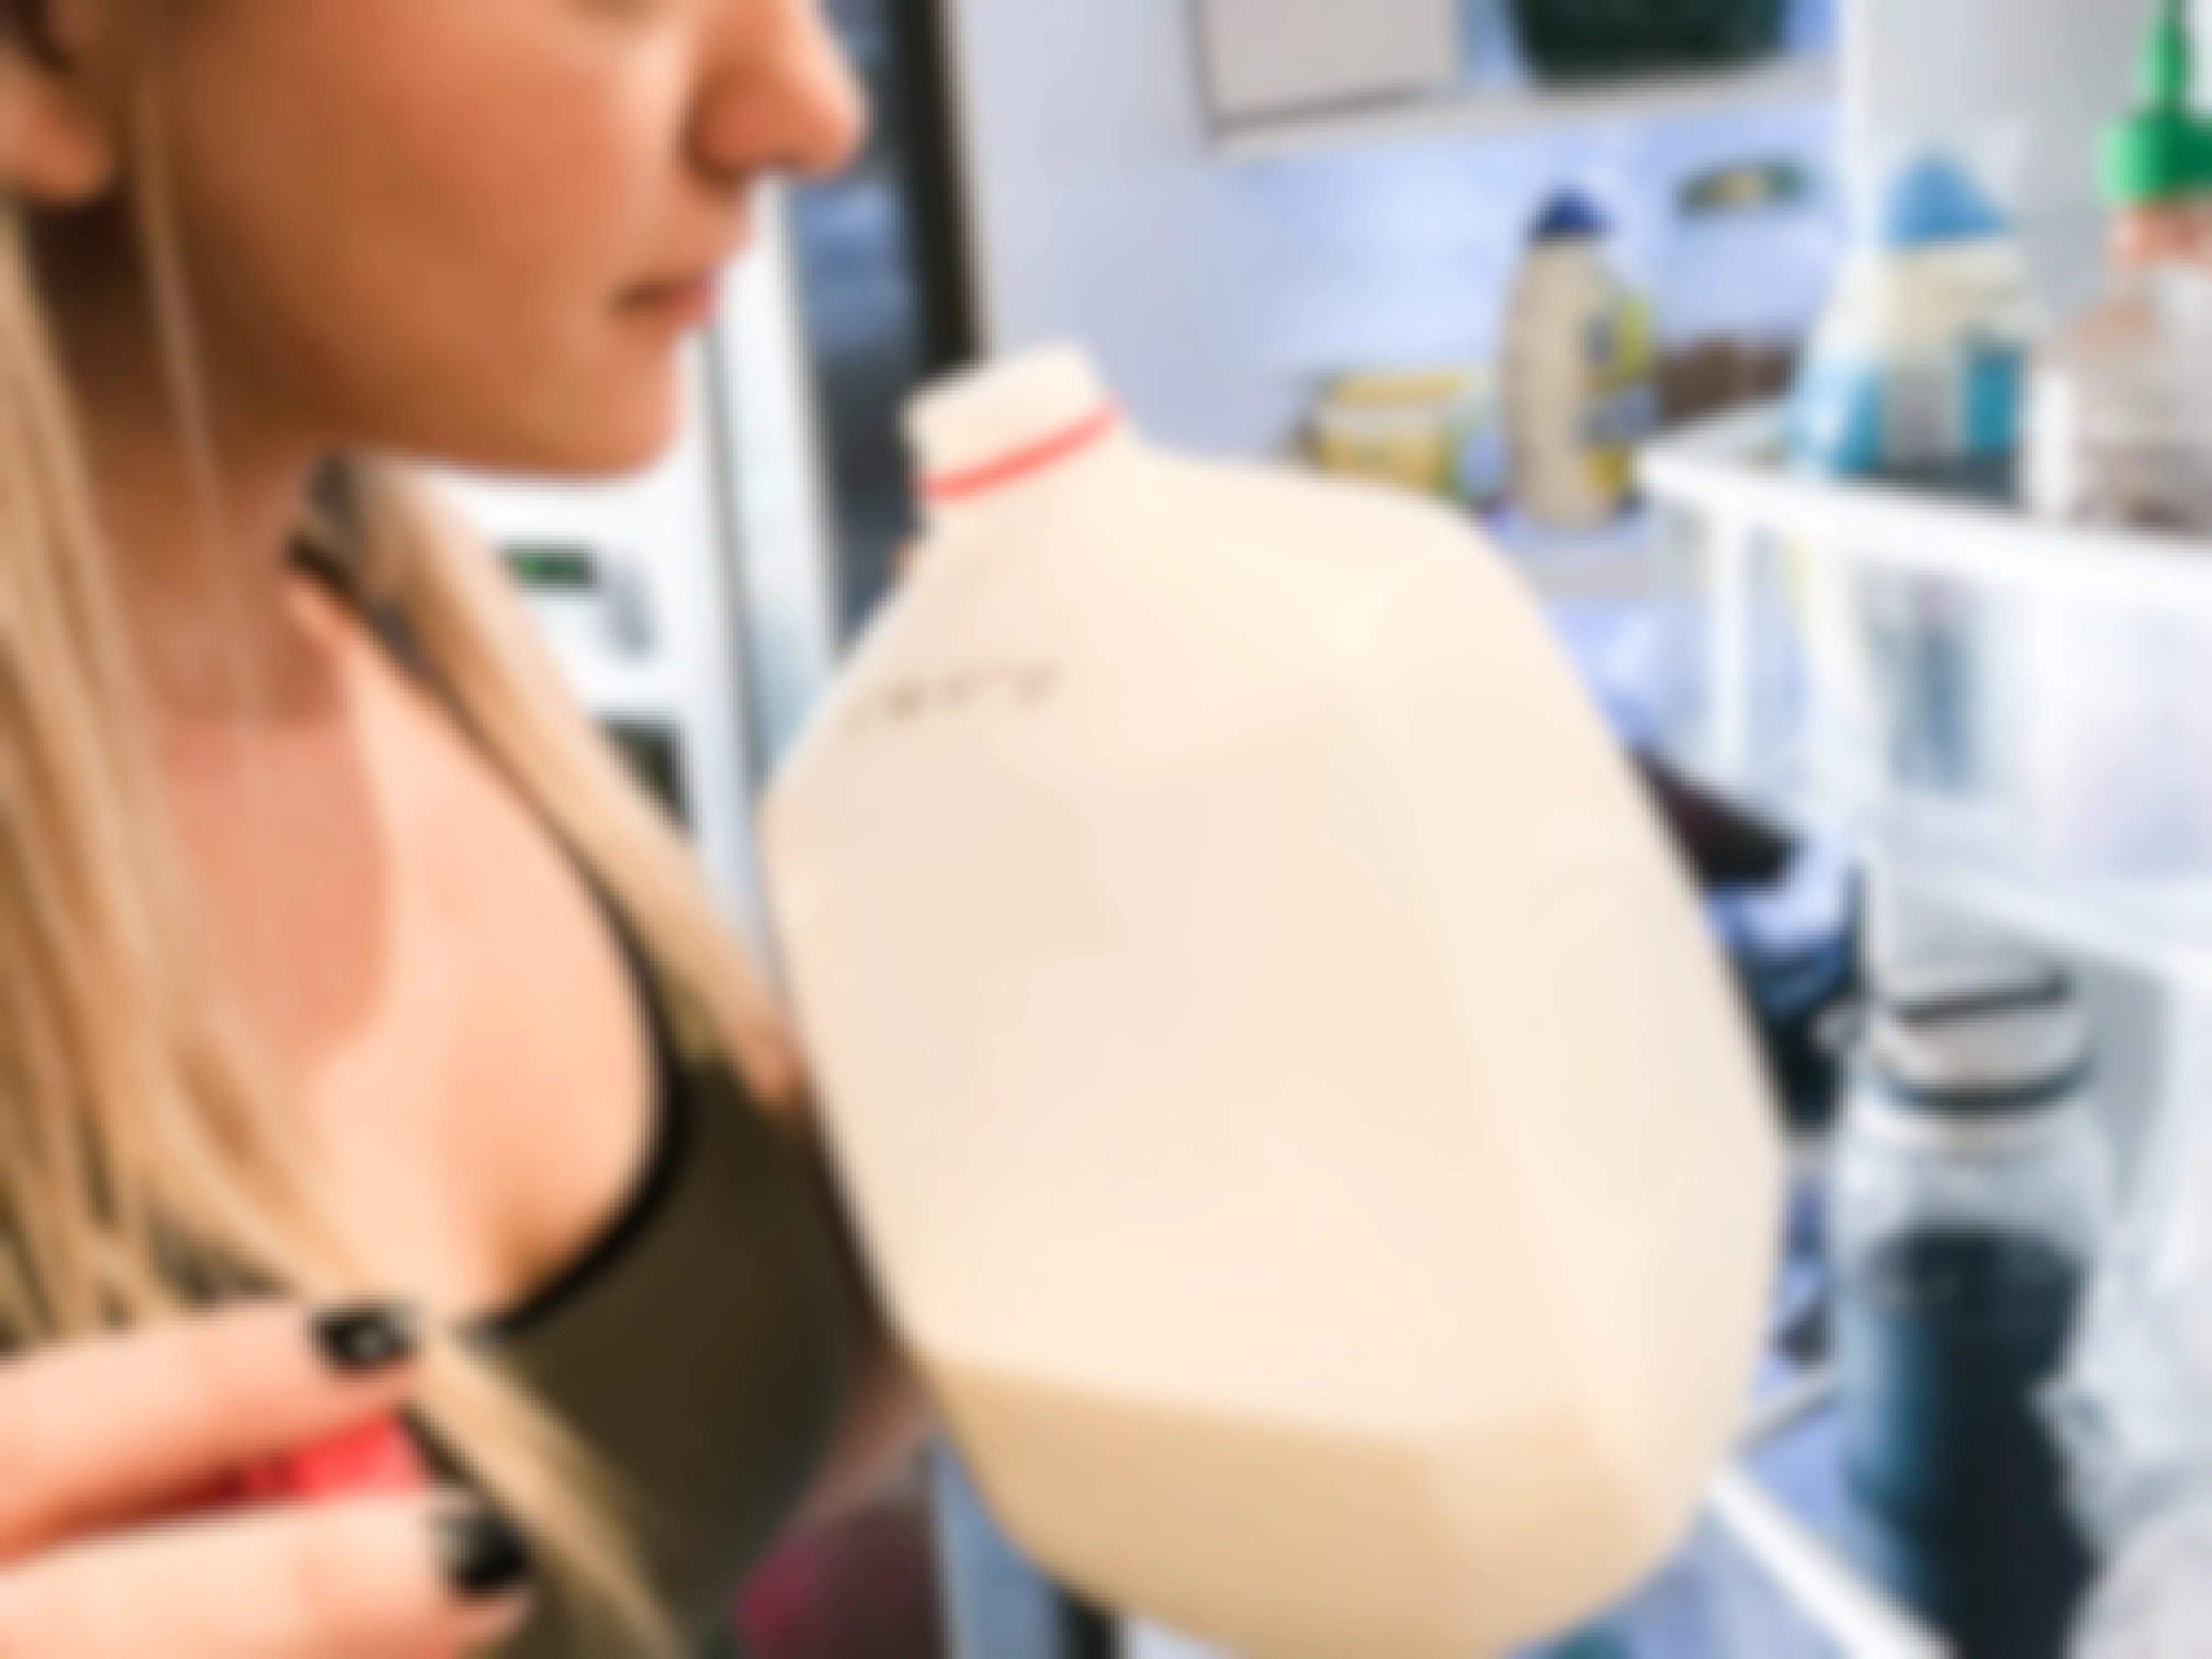 Woman sniffing an open gallon jug of milk.